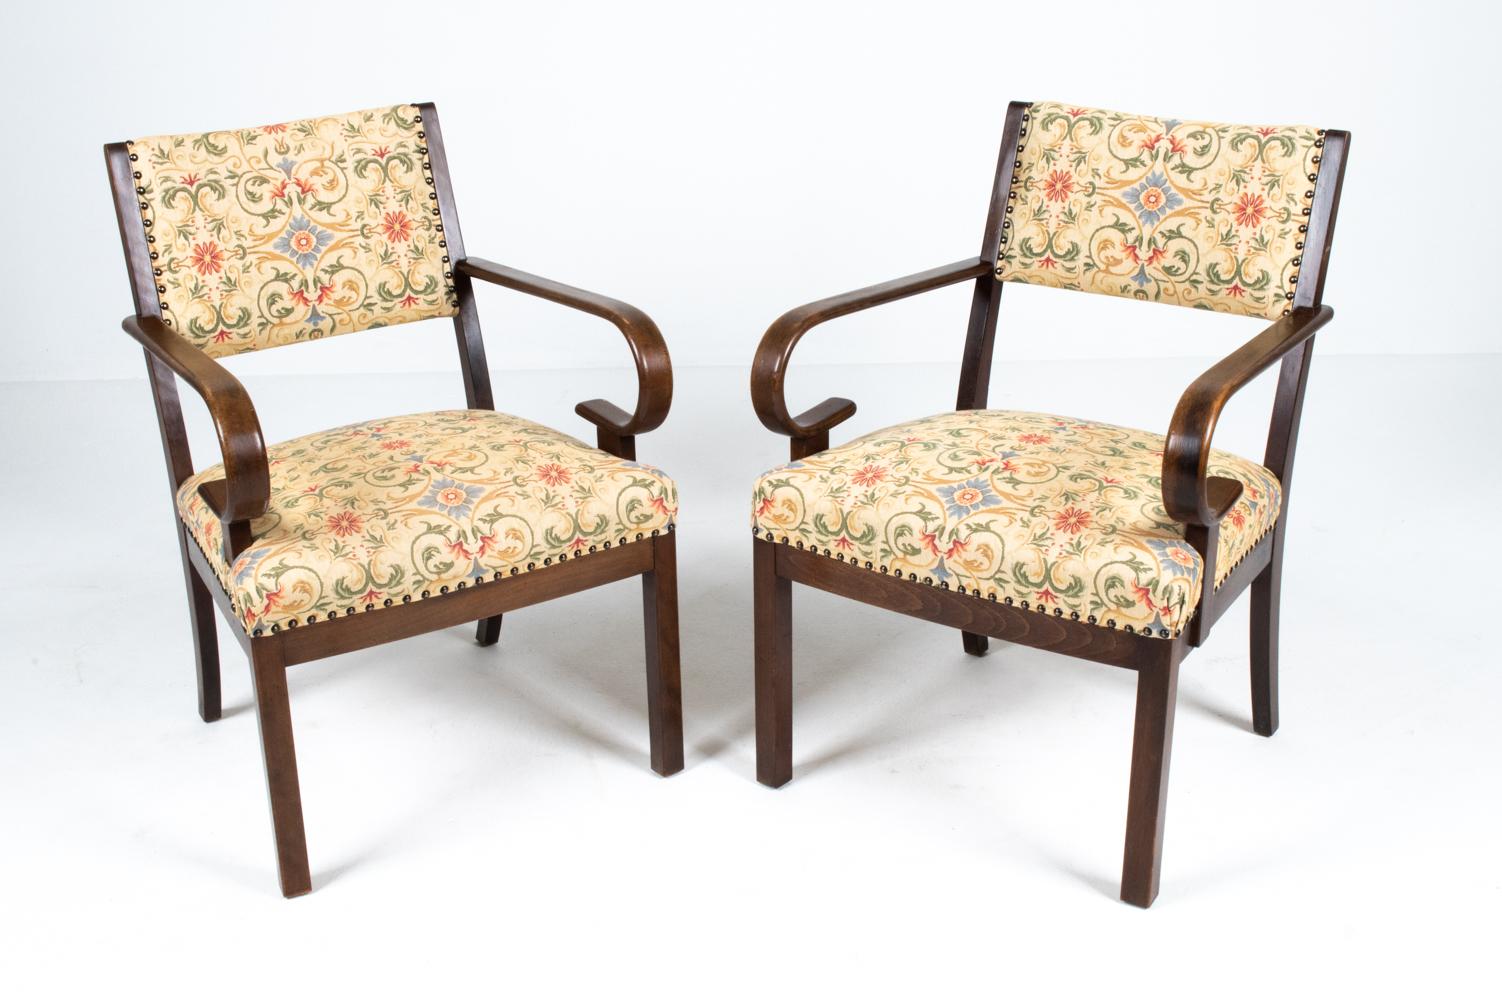 Dating from the Late Art Deco period, this extremely rare and unusual pair of armchairs features dramatic hairpin arms and simple rectangular backs. The frame is solid beechwood, finished in a rich mahogany stain. Woven floral fabric and nailhead